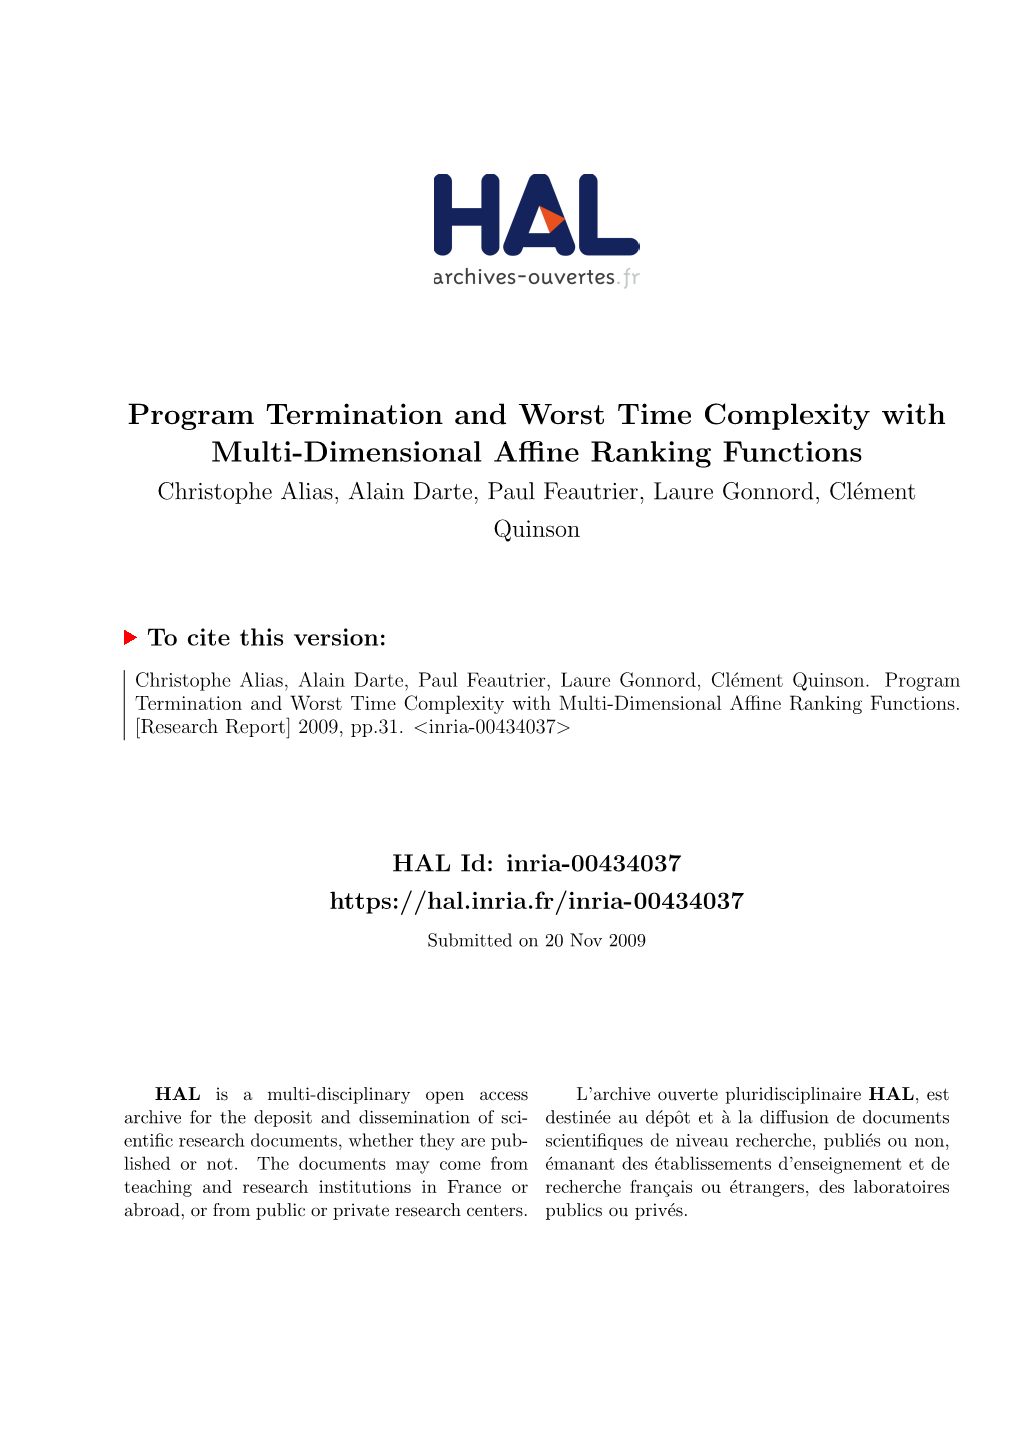 Program Termination and Worst Time Complexity with Multi-Dimensional Affine Ranking Functions